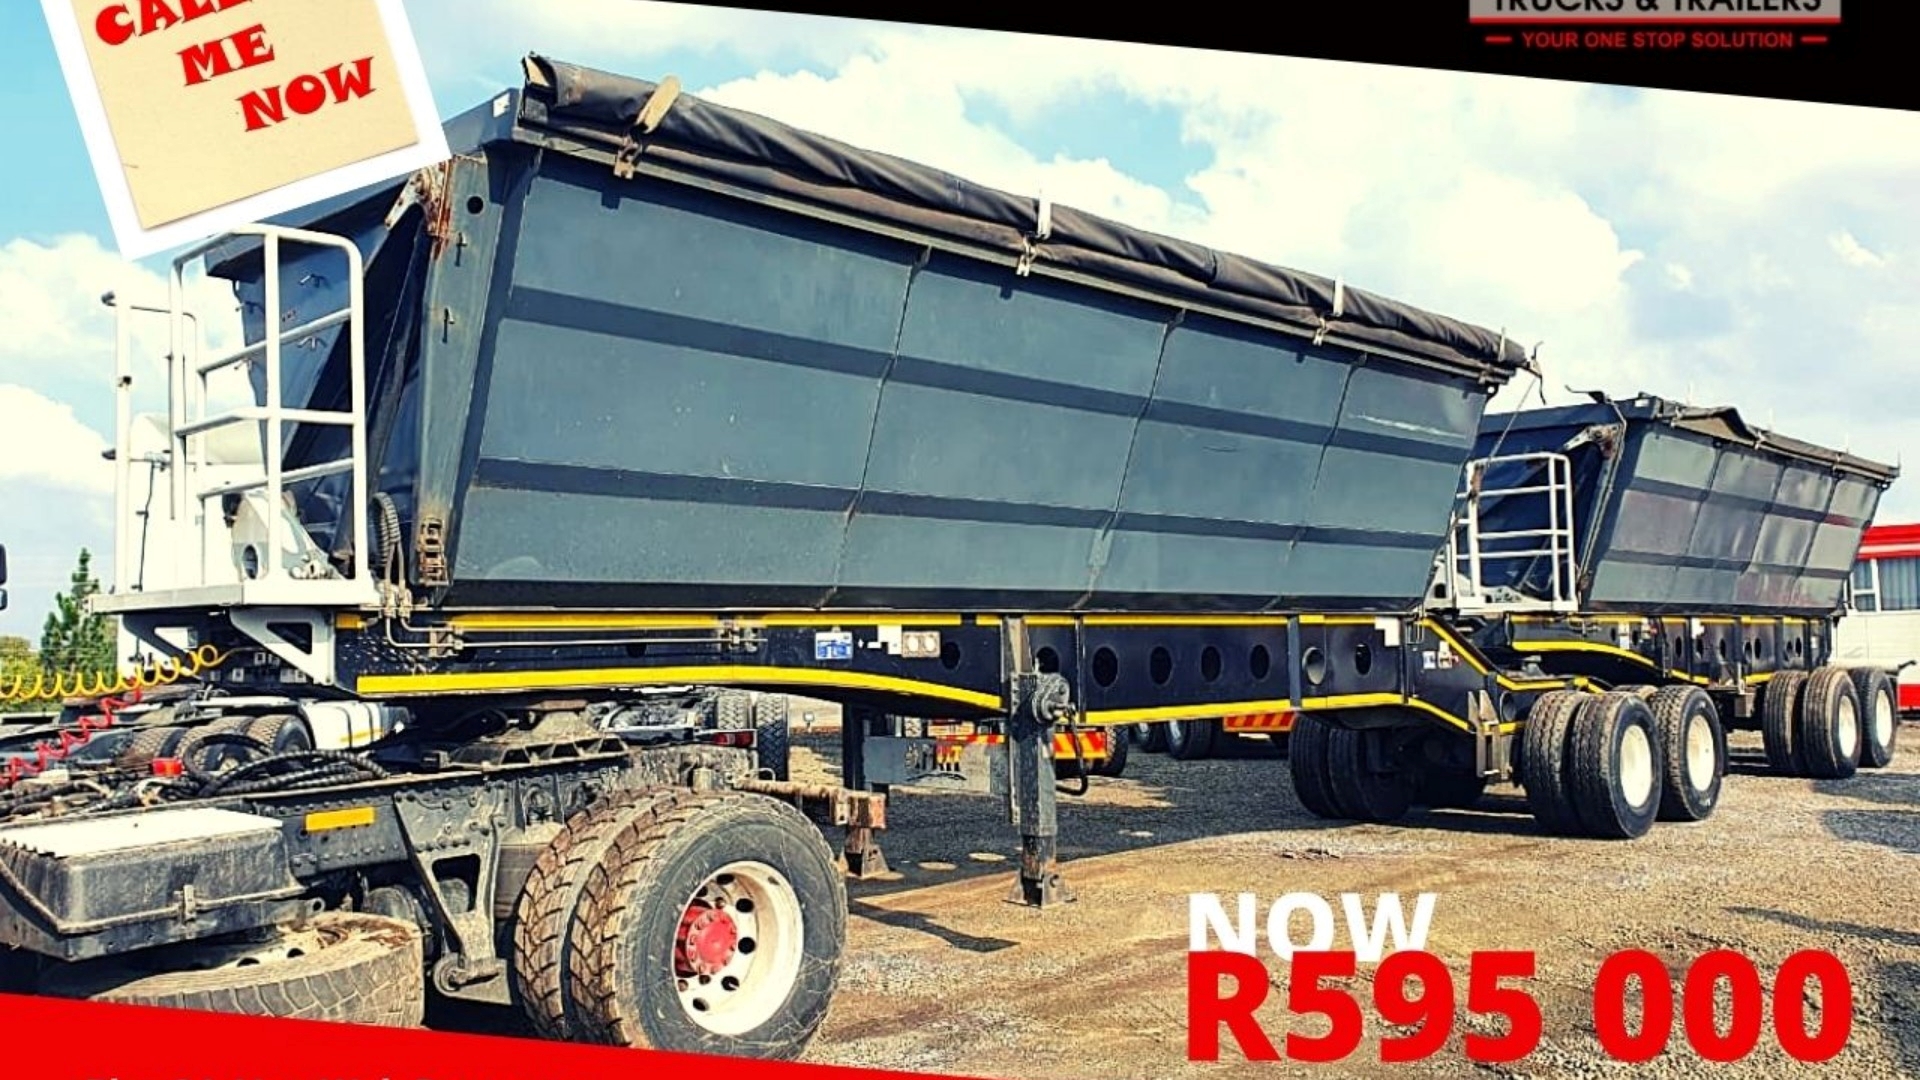 Afrit Trailers Side tipper AFRIT 45CUBE SIDE TIPPER 2019 for sale by ZA Trucks and Trailers Sales | Truck & Trailer Marketplaces